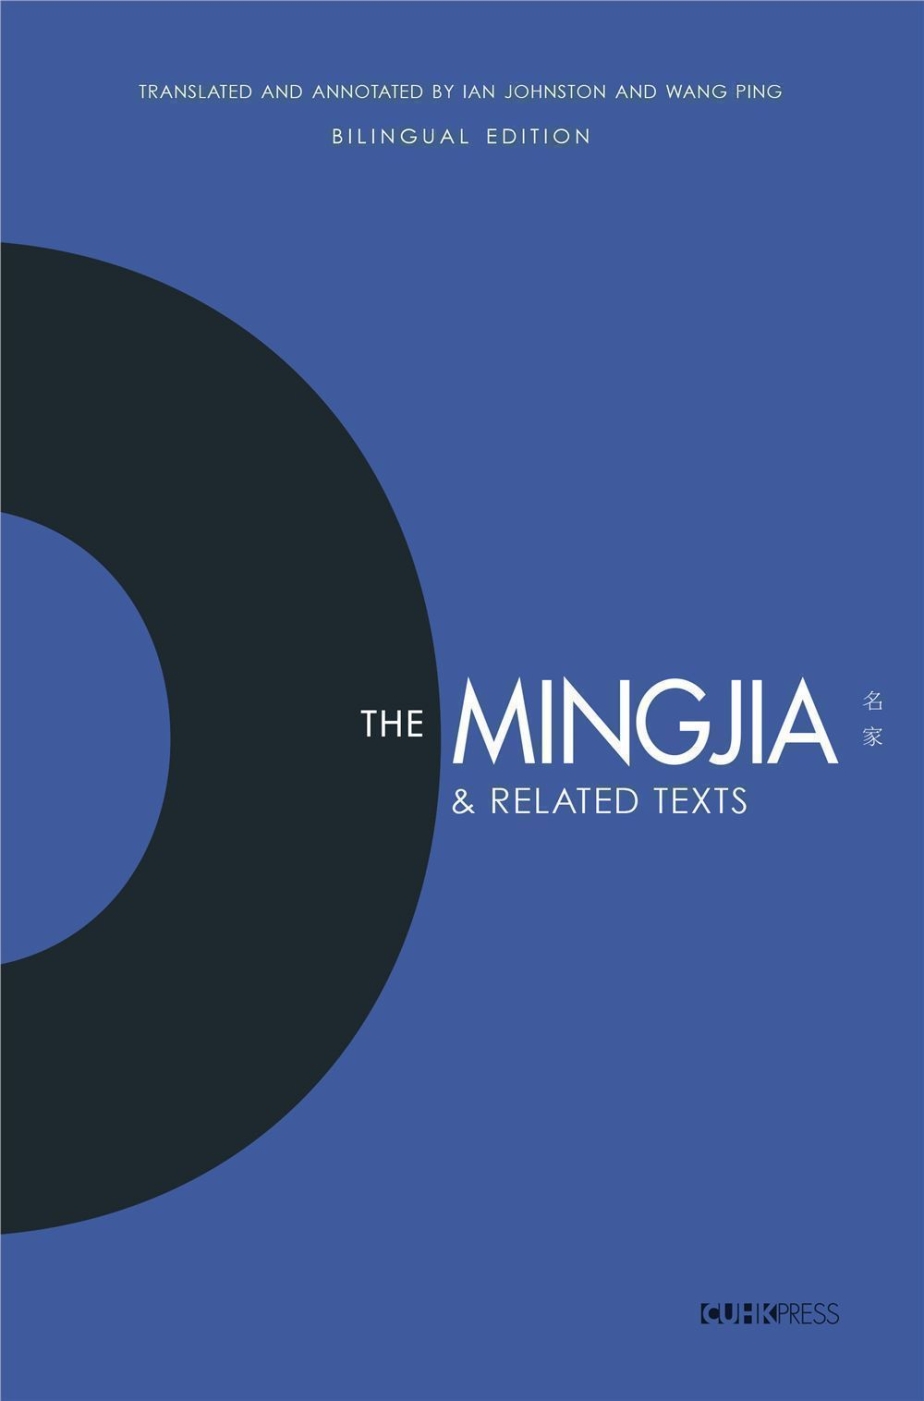 The Mingjia & Related Texts